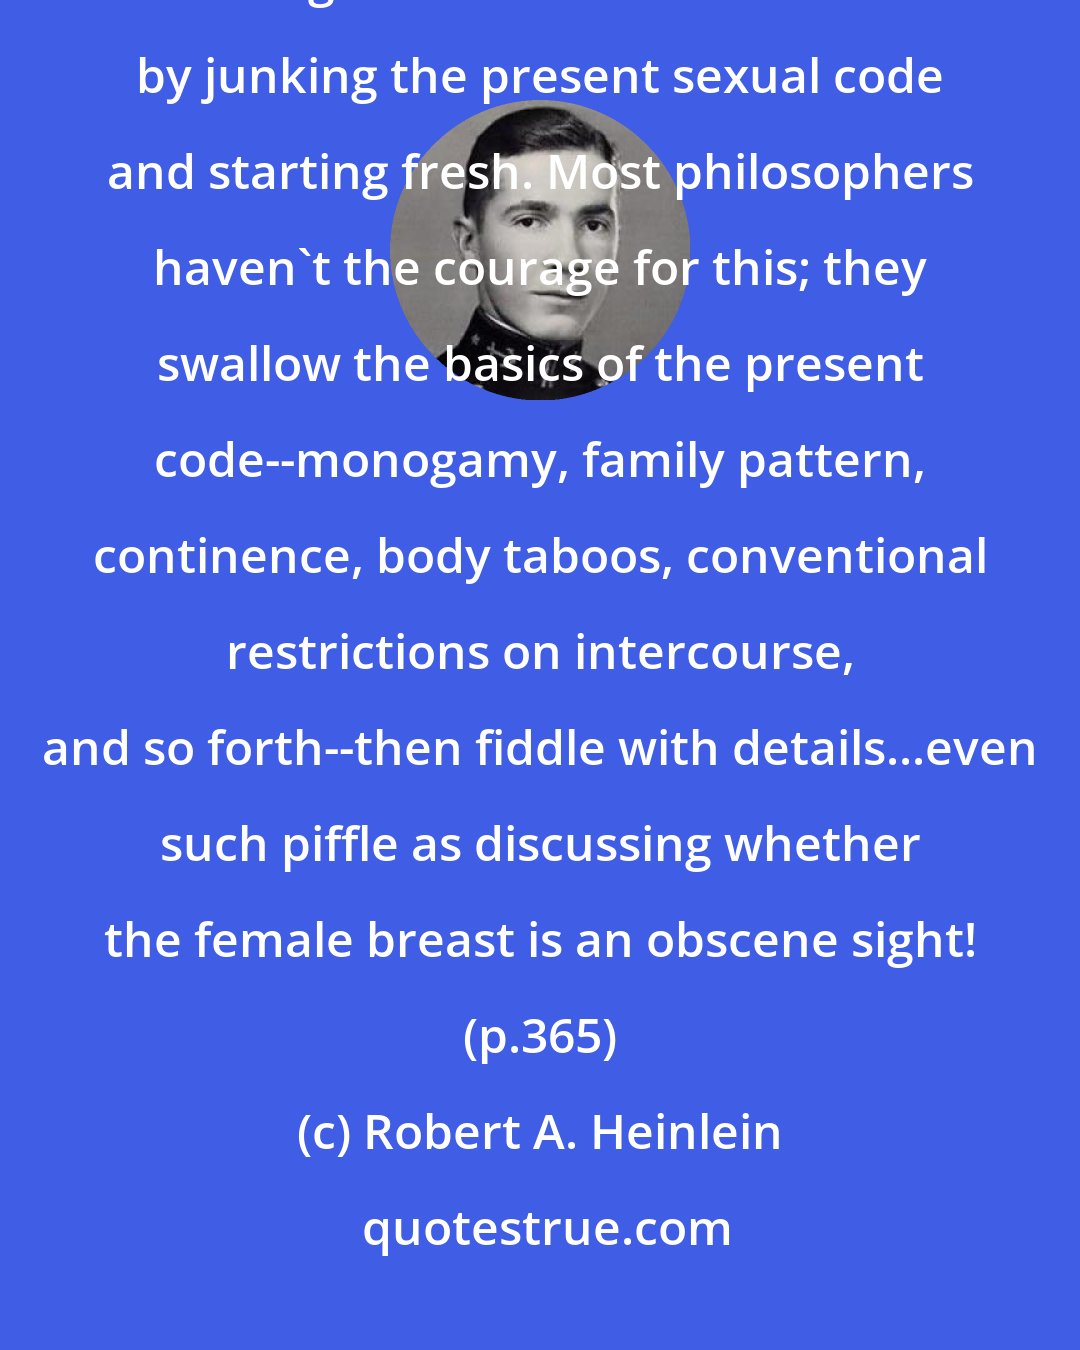 Robert A. Heinlein: I see the beauty of Mike's attempt to devise an ideal ethic and applaud his recognition that such must start by junking the present sexual code and starting fresh. Most philosophers haven't the courage for this; they swallow the basics of the present code--monogamy, family pattern, continence, body taboos, conventional restrictions on intercourse, and so forth--then fiddle with details...even such piffle as discussing whether the female breast is an obscene sight! (p.365)